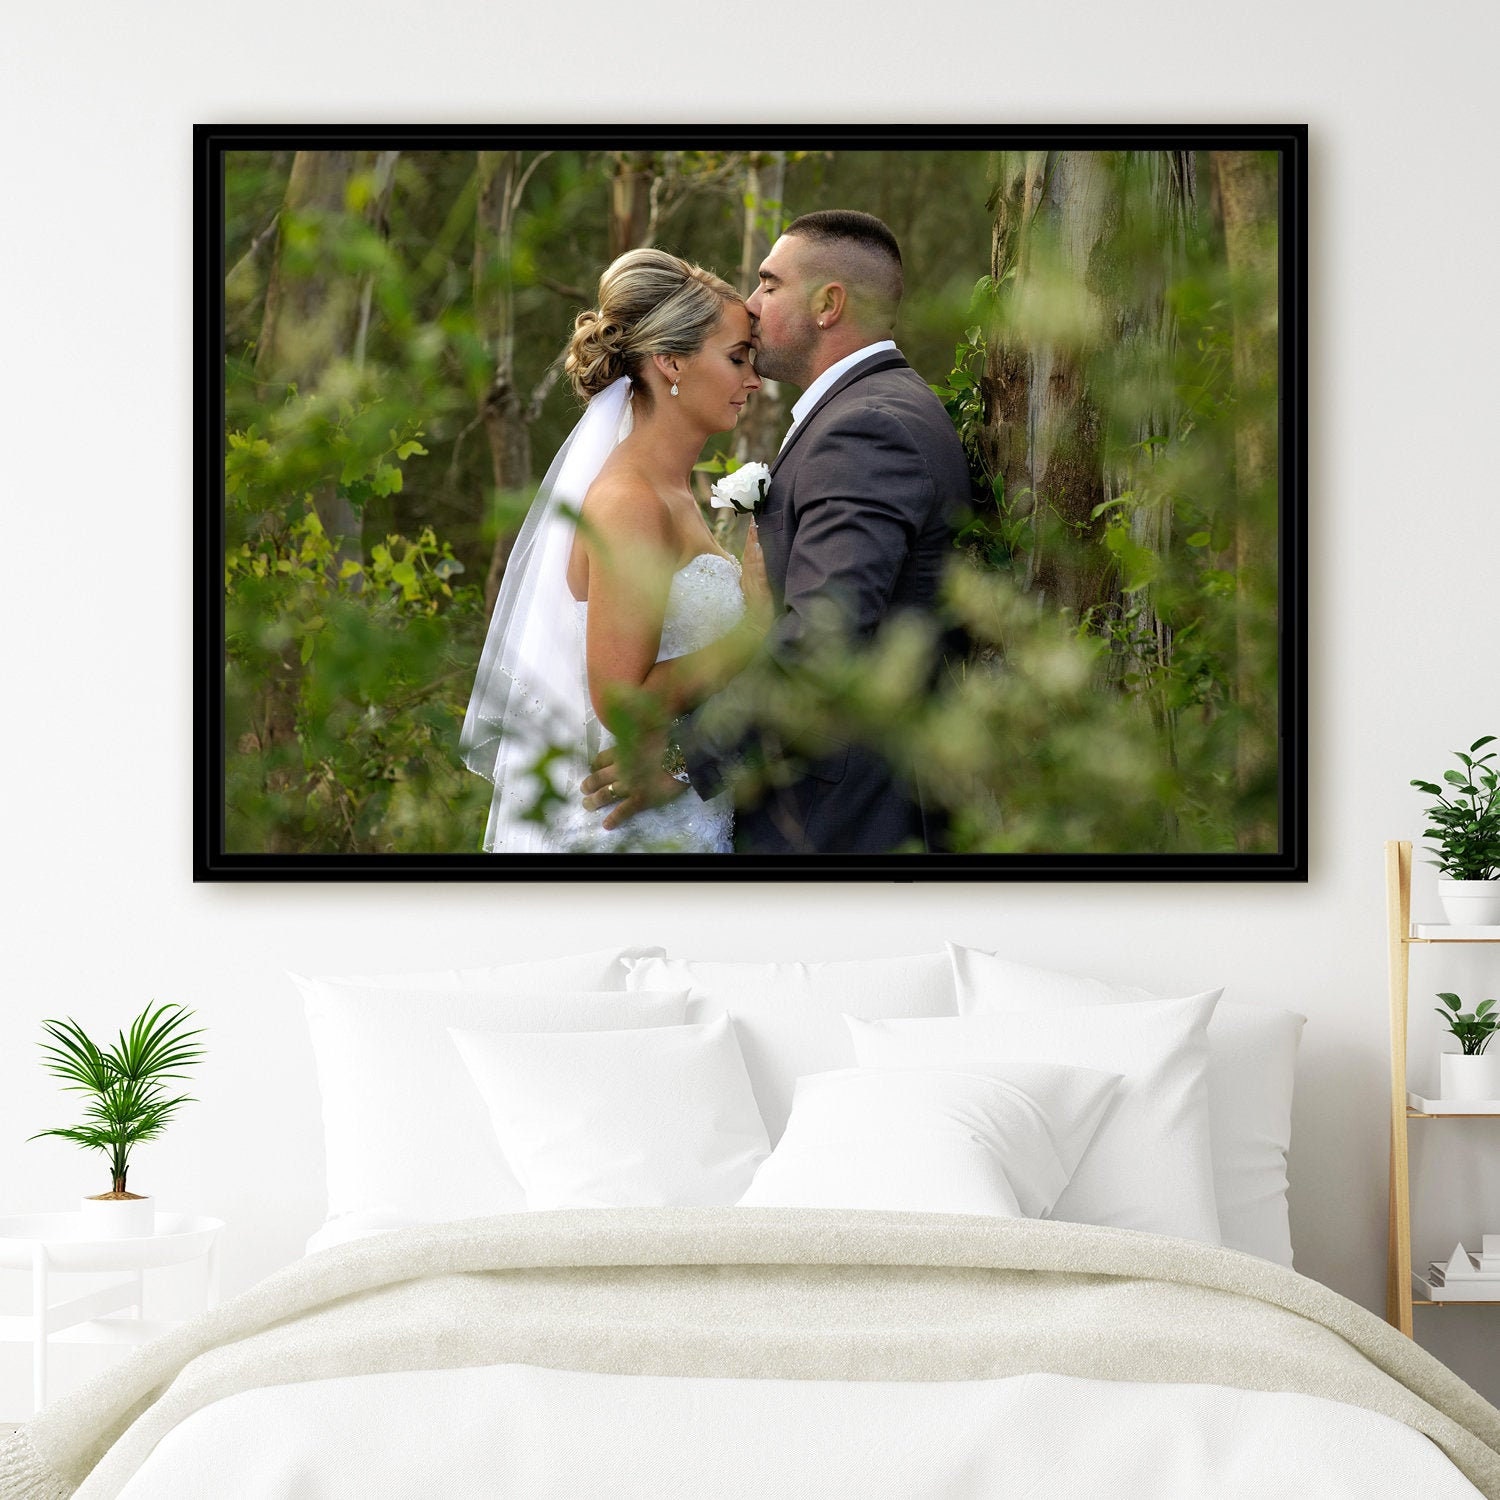 Custom Canvas Photo Image To Wall Art | Your Original On Print Personalized Gifts With Wedding Picture, Family, Friends, Pets